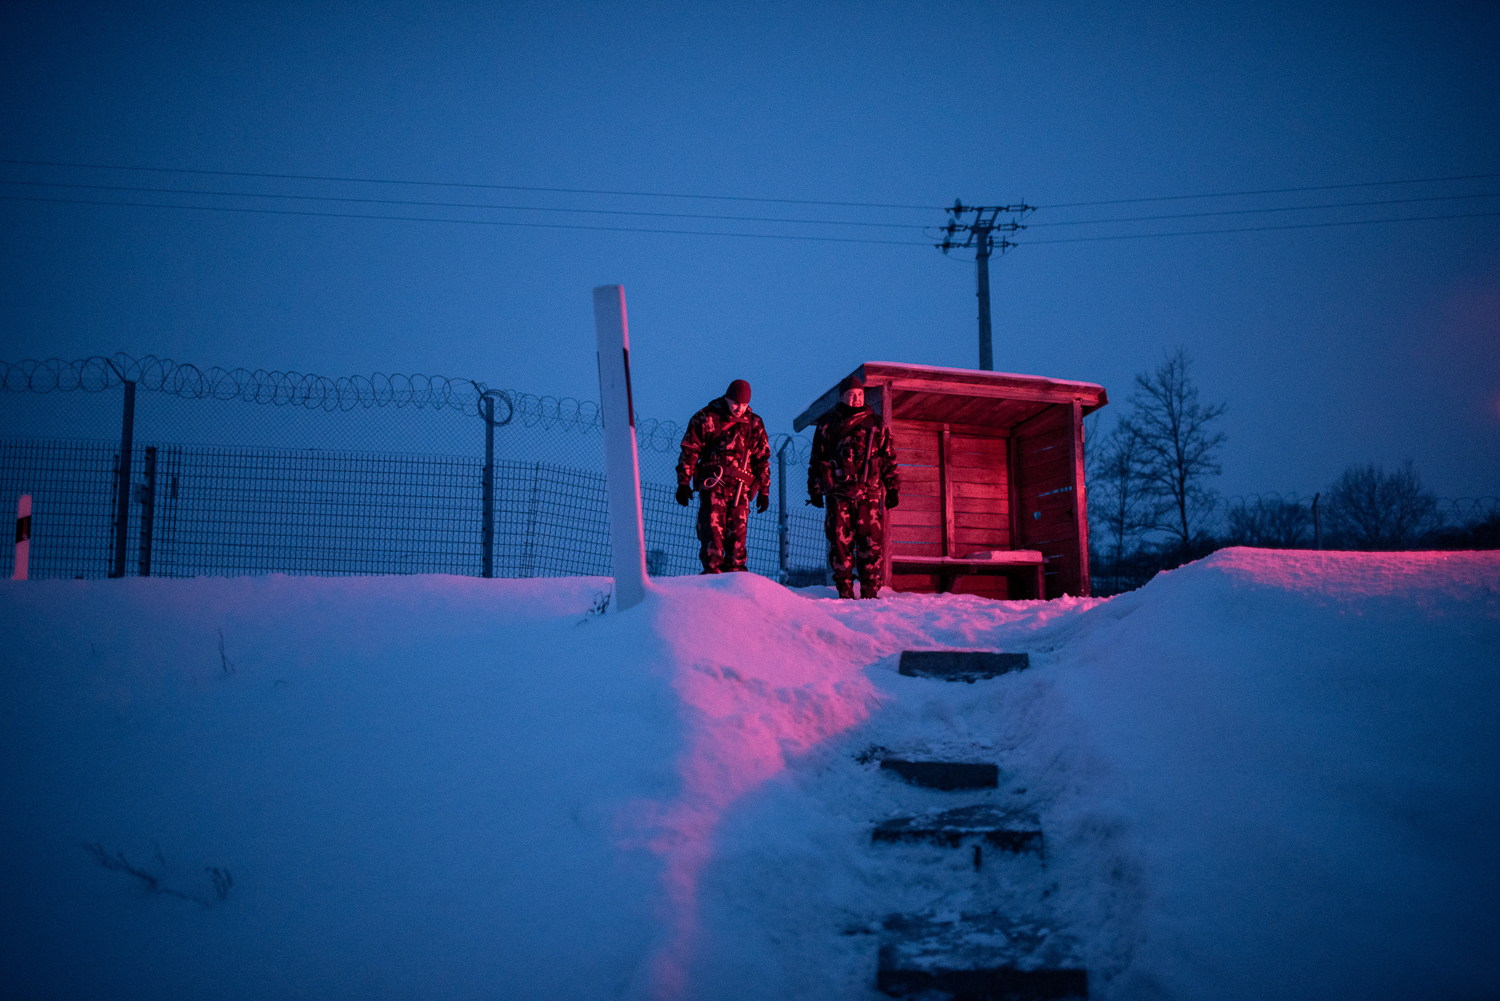  Soldiers stands in front of a military shelter to secure the border between Hungary and Serbia near Gara, Hungary 27 February 2018. The Hungarian border fence was constructed in the middle of the European migration crisis in 2015, with the aim to en